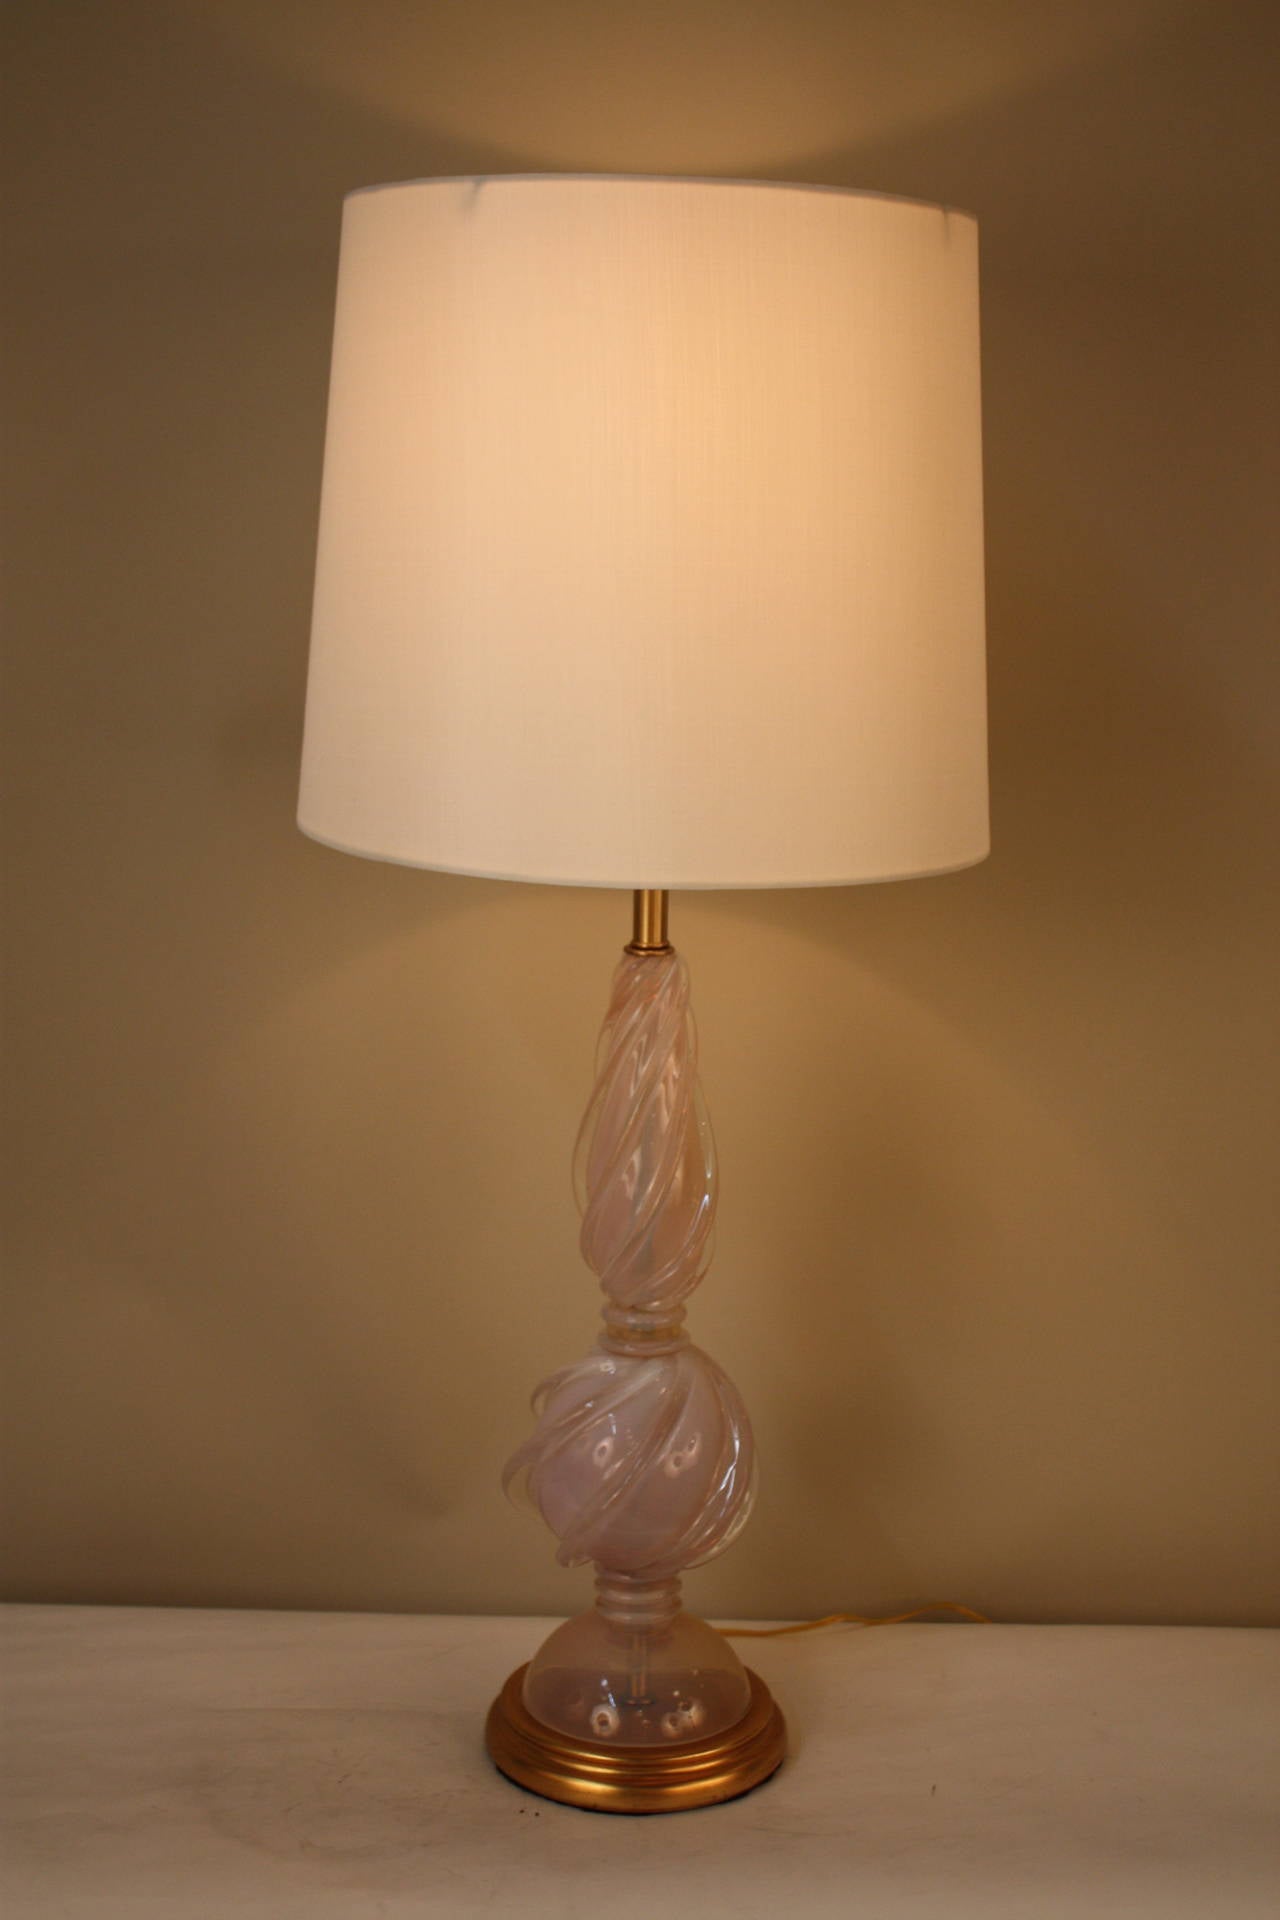 A beautiful opaline Murano glass table lamp with gold leaf base by Seguso Design for Marbro Lamp Co.